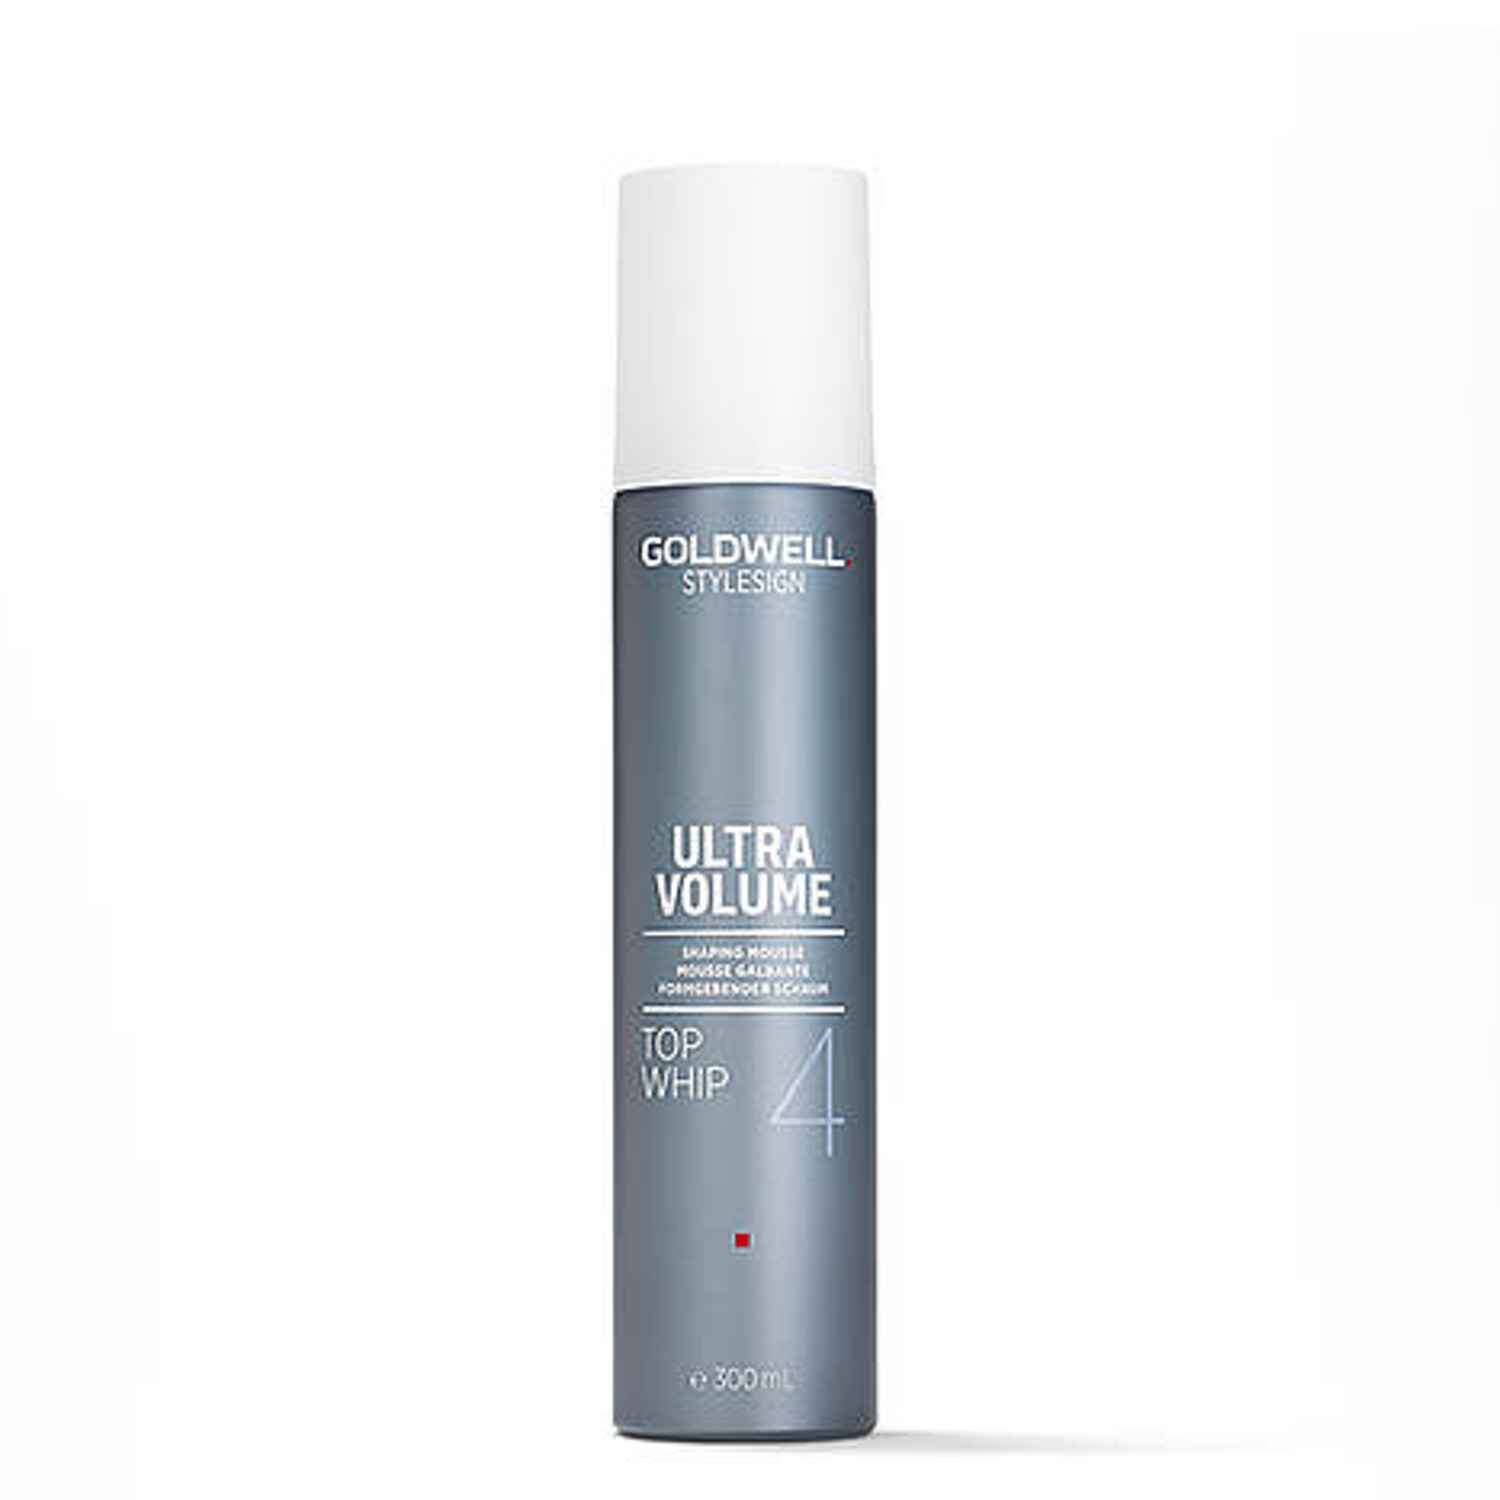 GOLDWELL Style Sign Ultra Volume TOP WHIP 300 ml